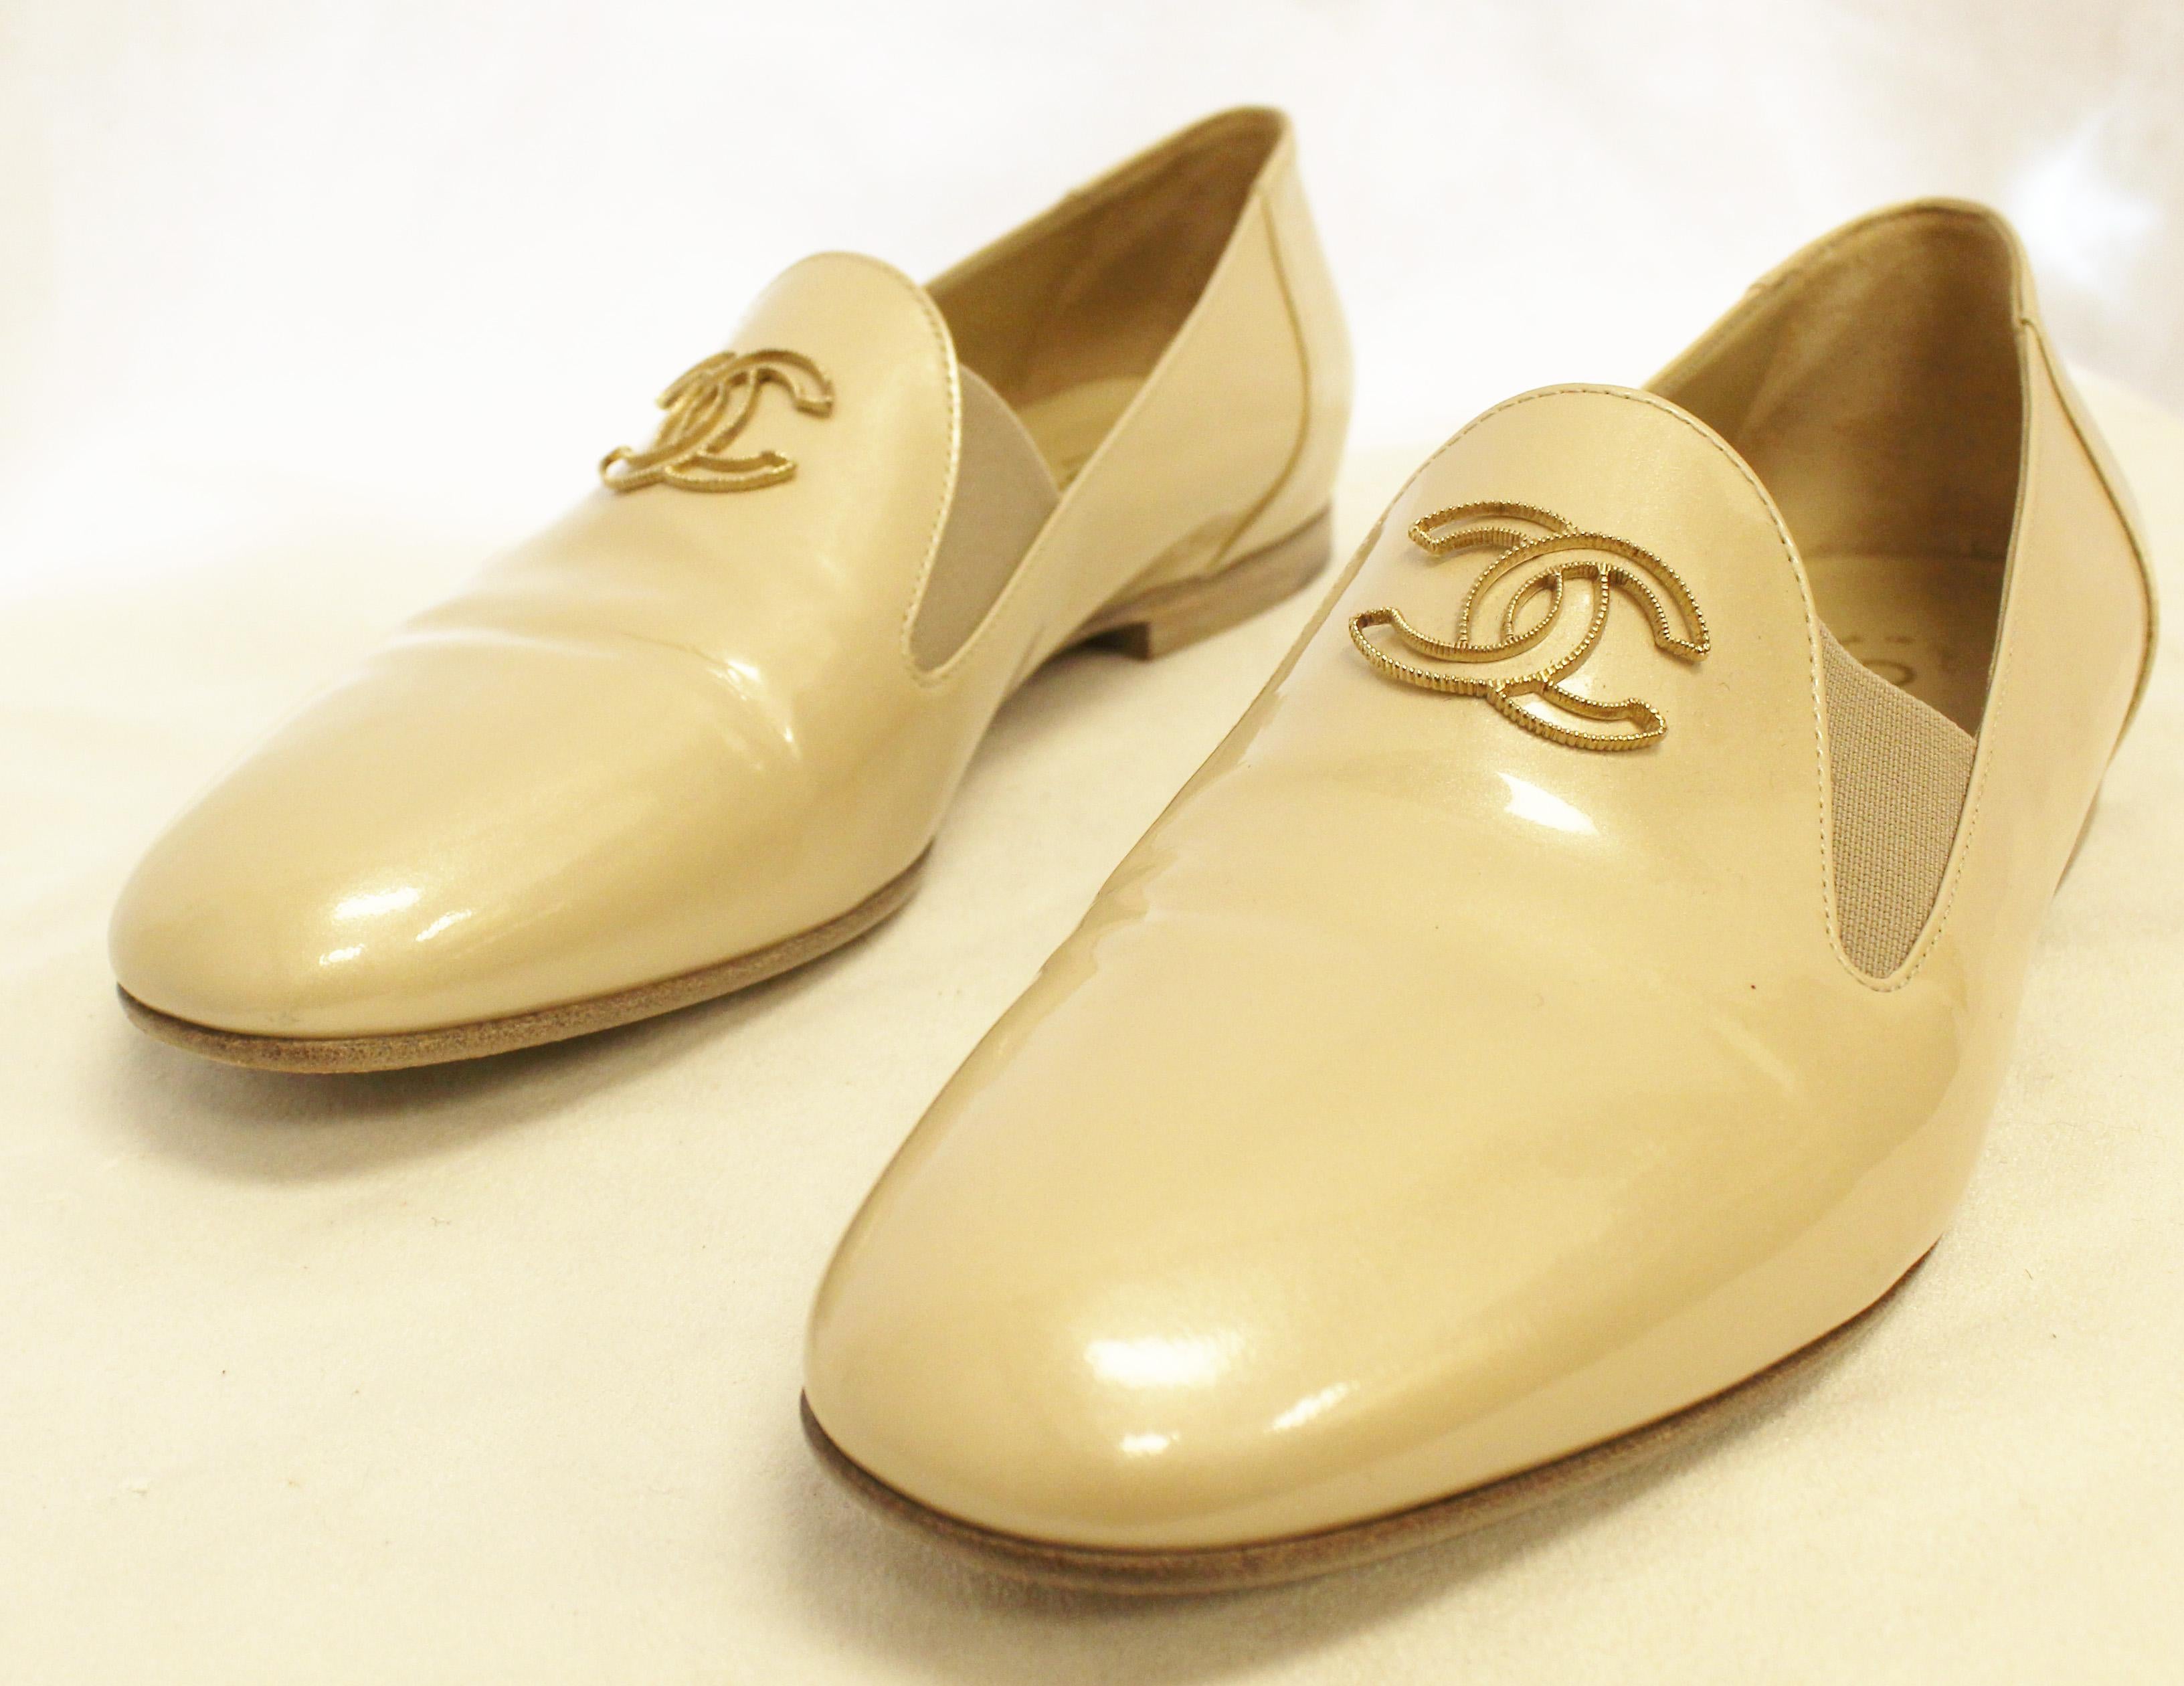 Chanel pearlized beige patent leather flats with round toe with gold tone interlocking CC logo on upper of loafers really portray Coco's style.  In excellent shape, unusual to get into the shop!.  